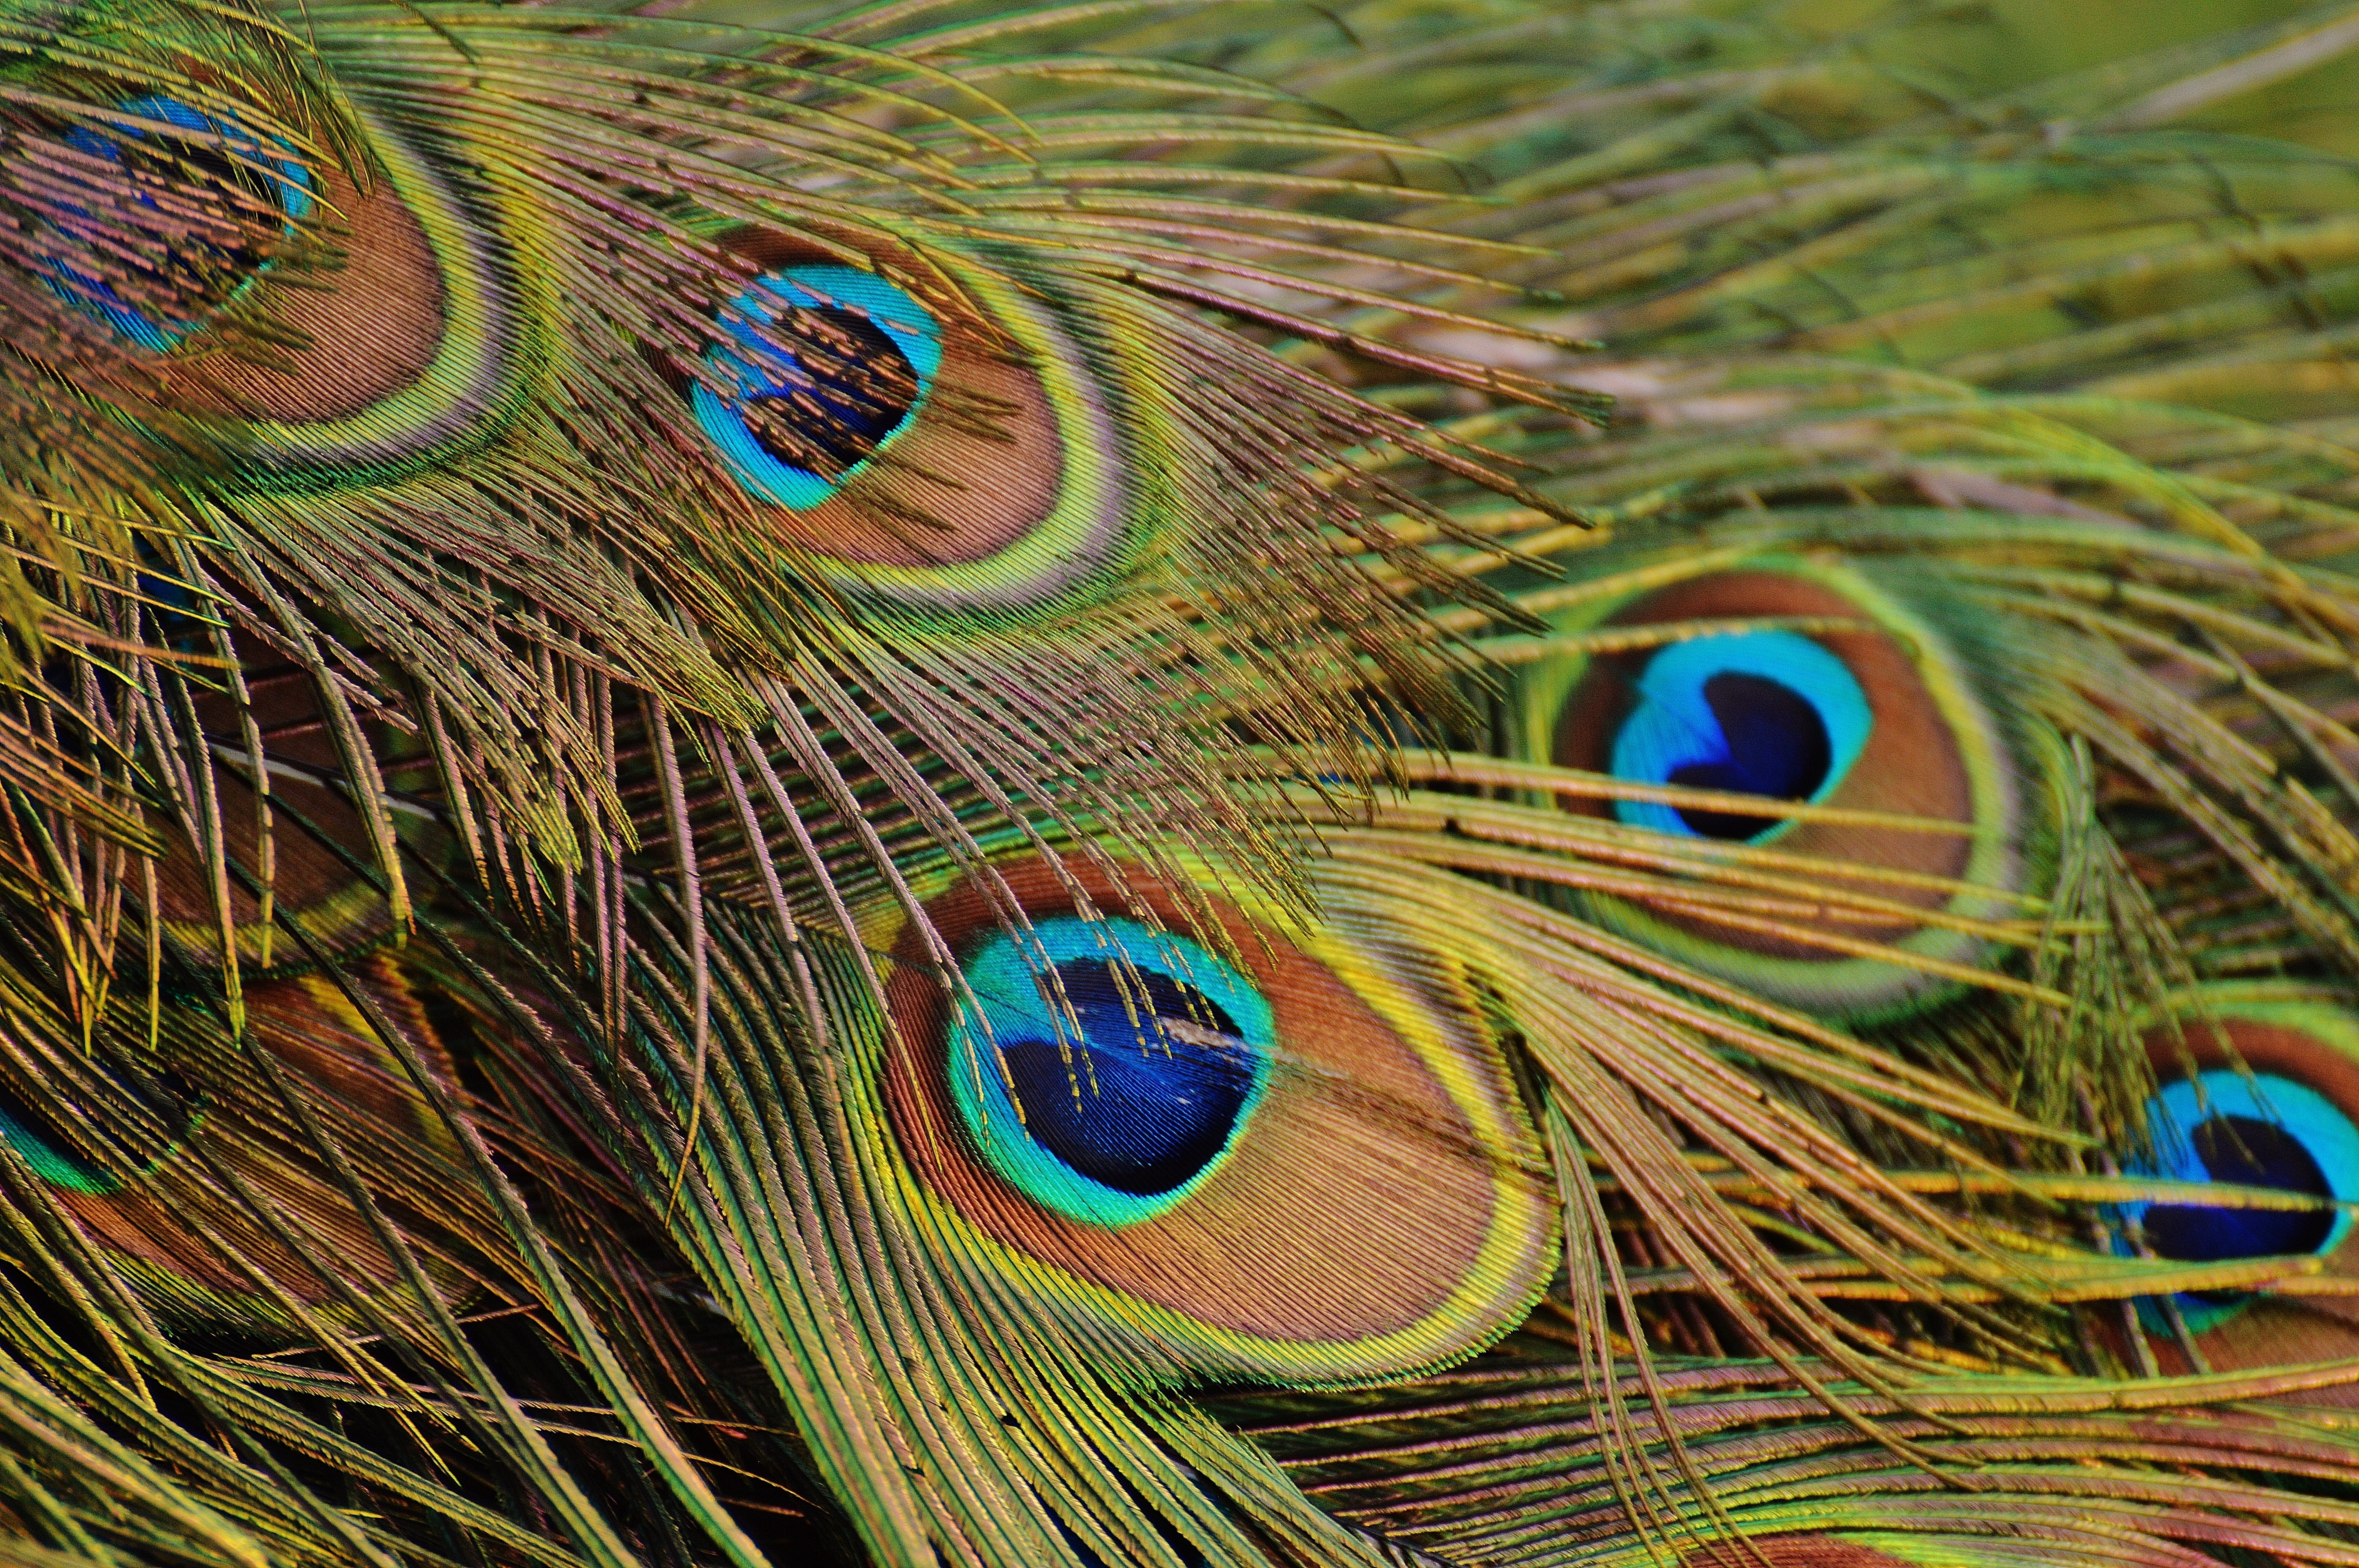 close up photo of peacock feathers